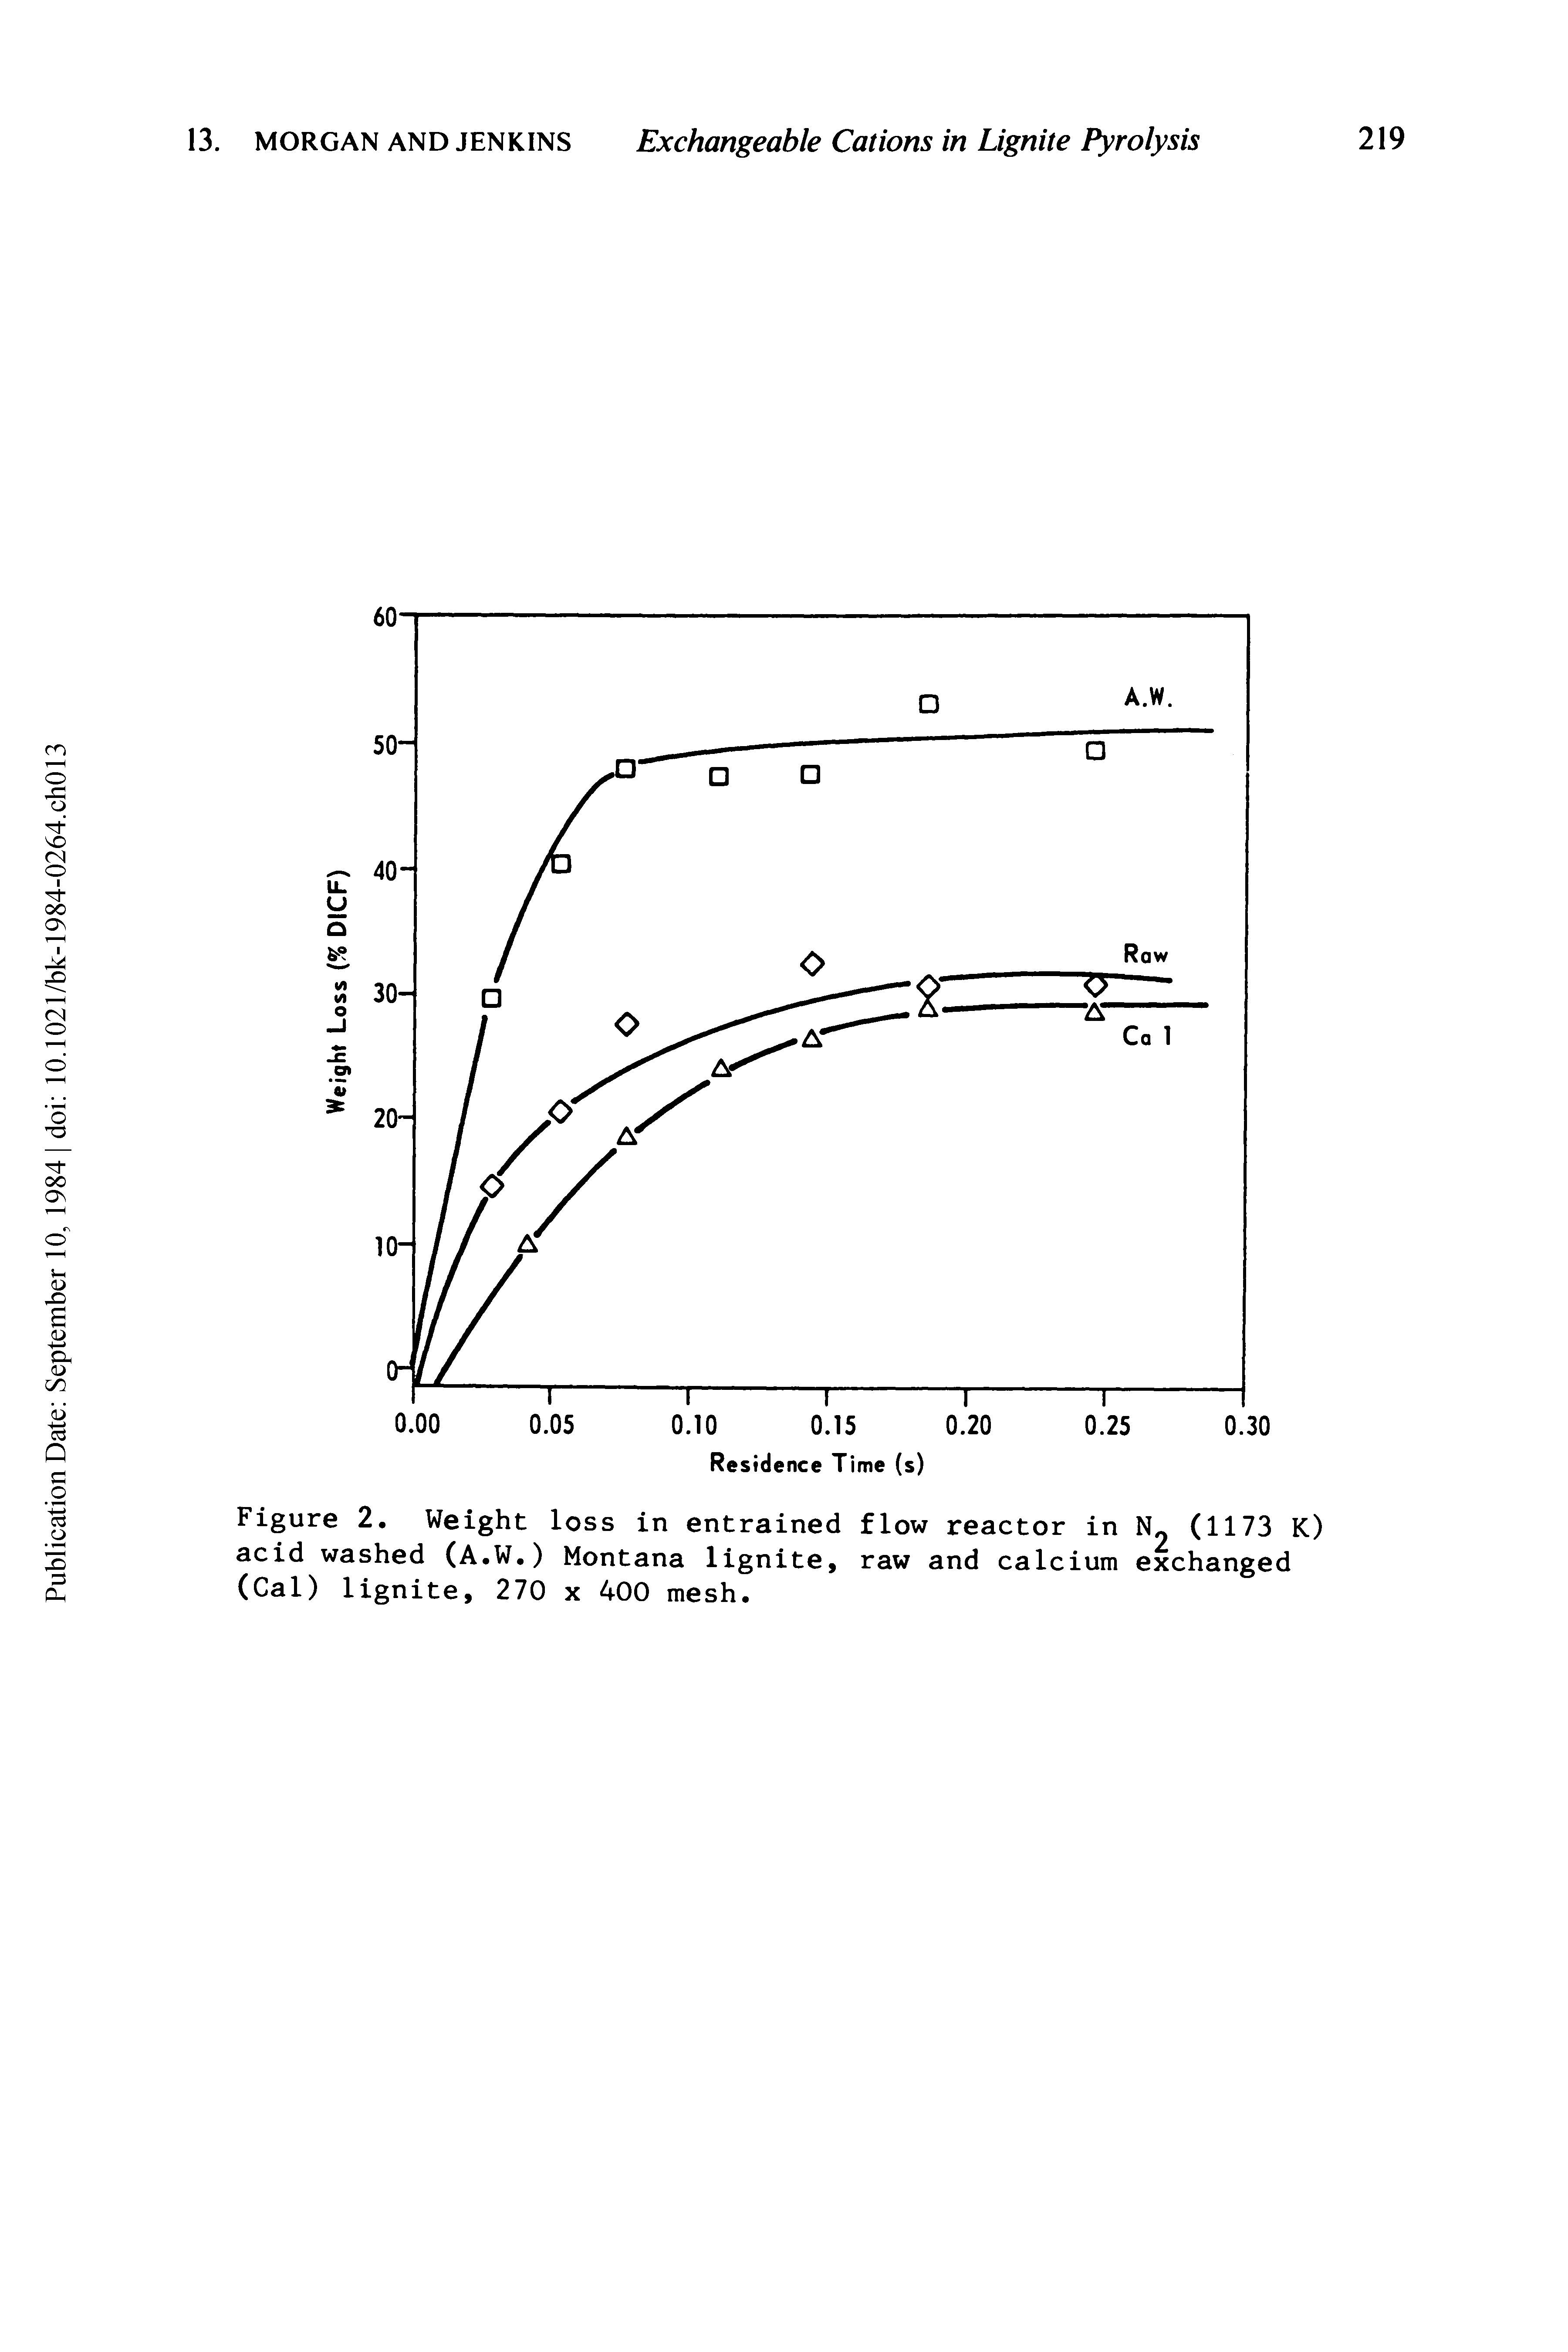 Figure 2. Weight loss in entrained flow reactor in (1173 K) acid washed (A.W.) Montana lignite, raw and calcium exchanged (Cal) lignite, 270 x 400 mesh.